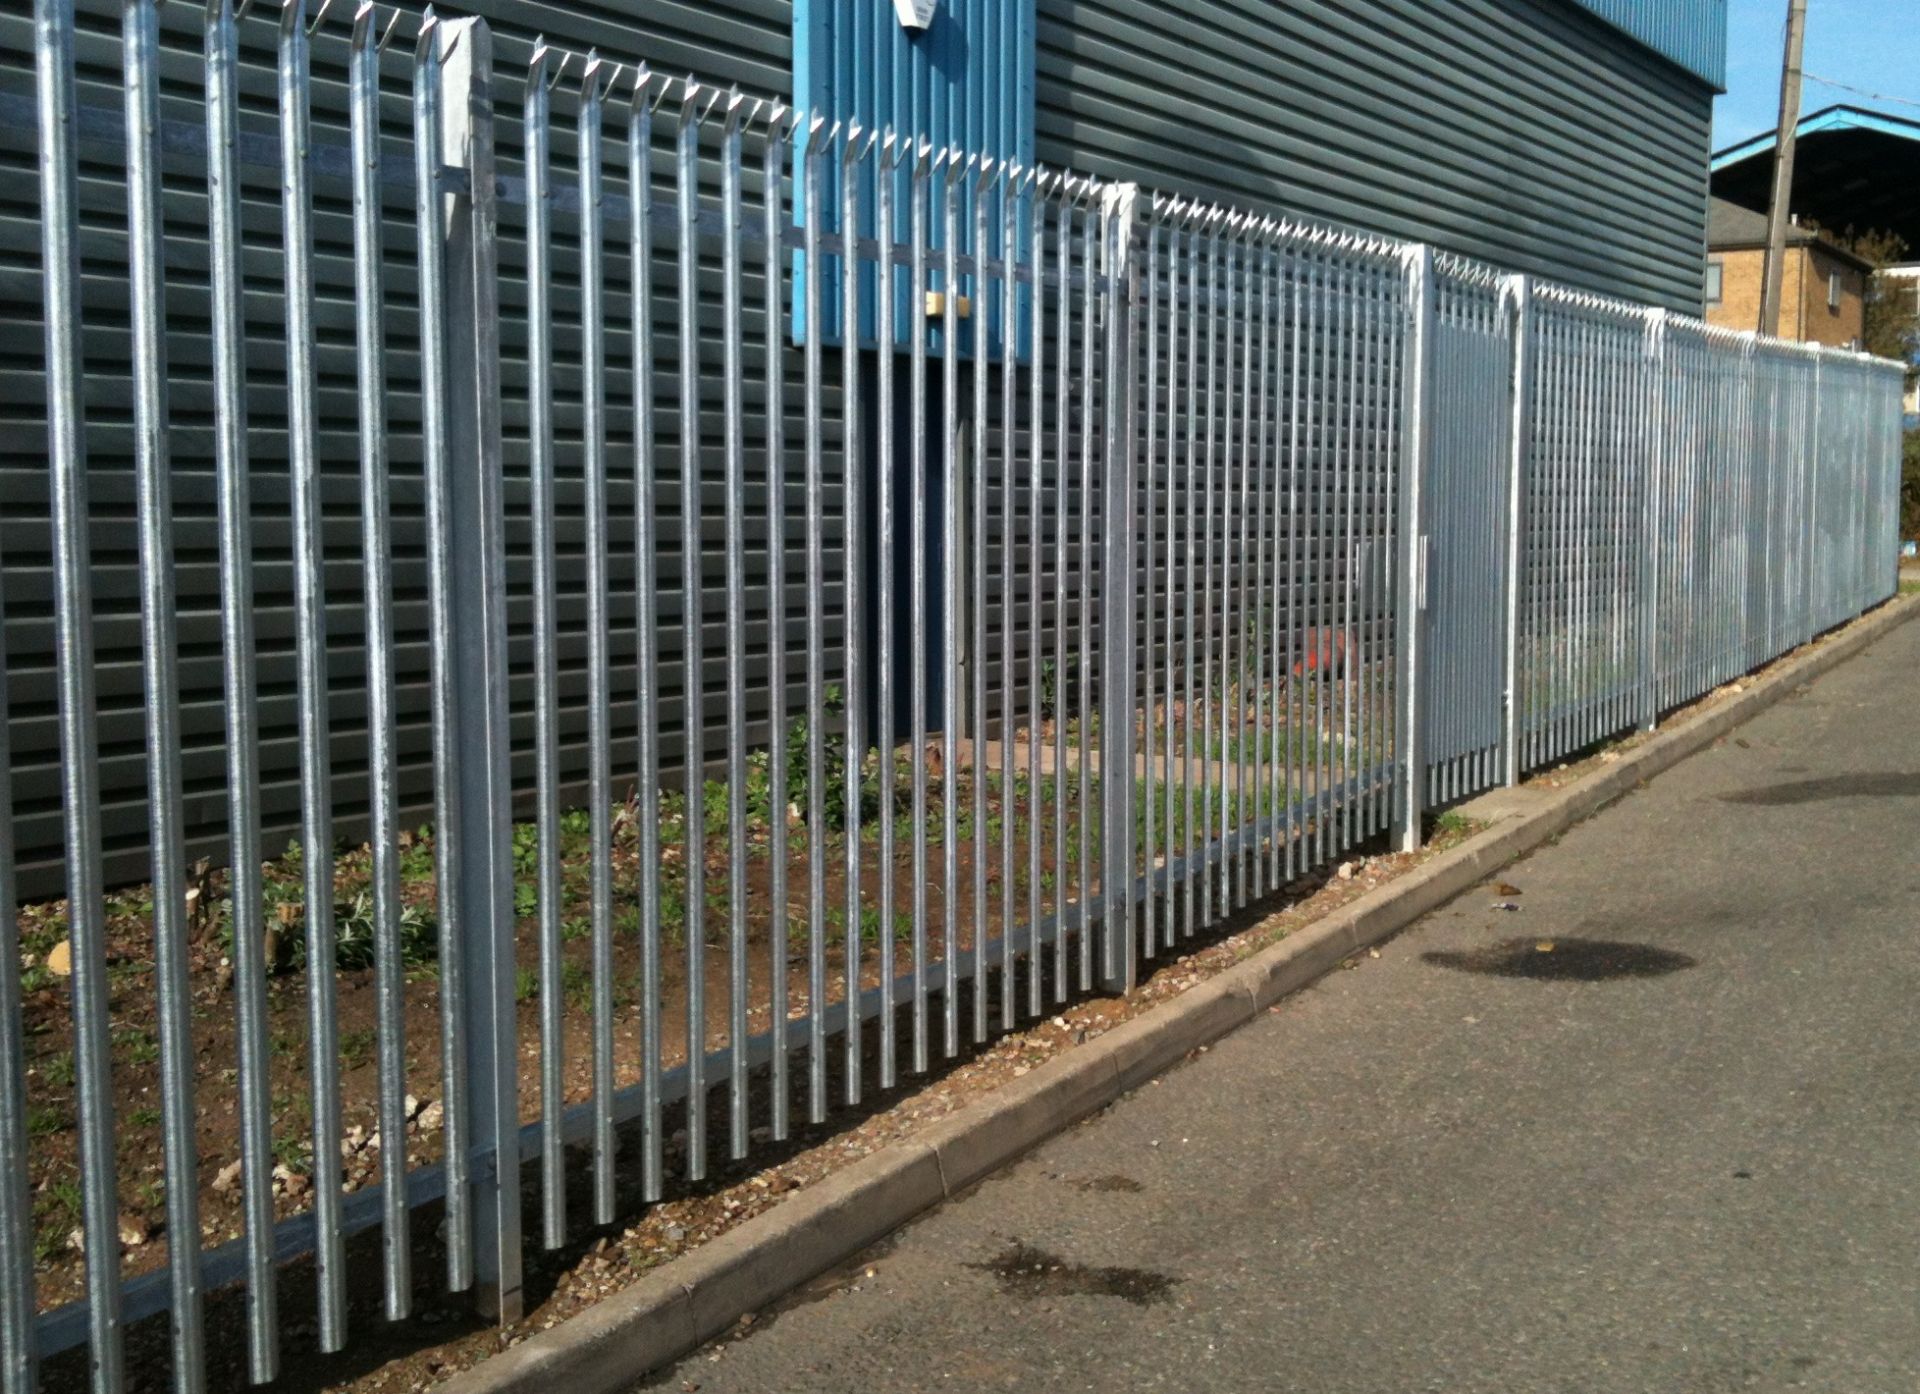 58.5 X Meter New Palleted 2.1M High Spec Palaside Fencing - 3M Sections, 80X80 Posts @2.7M Root Fix